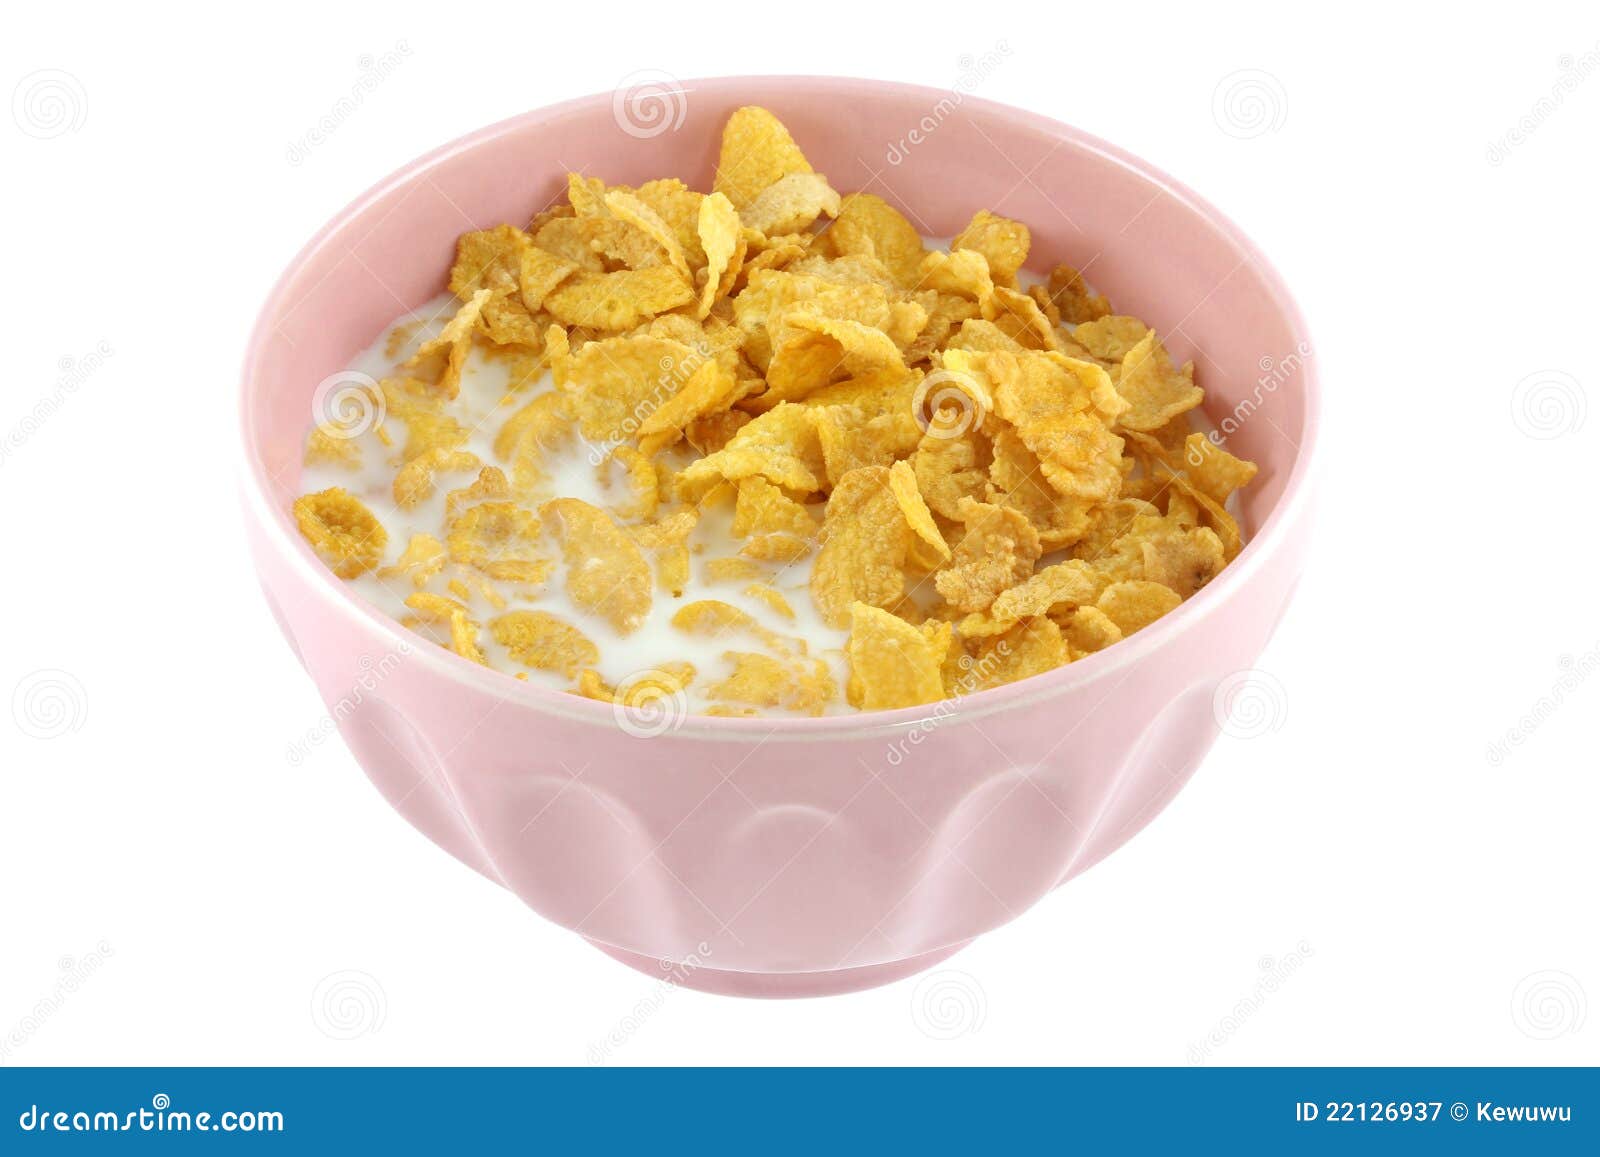 a pink bowl of cereal, corn flakes and fresh milk